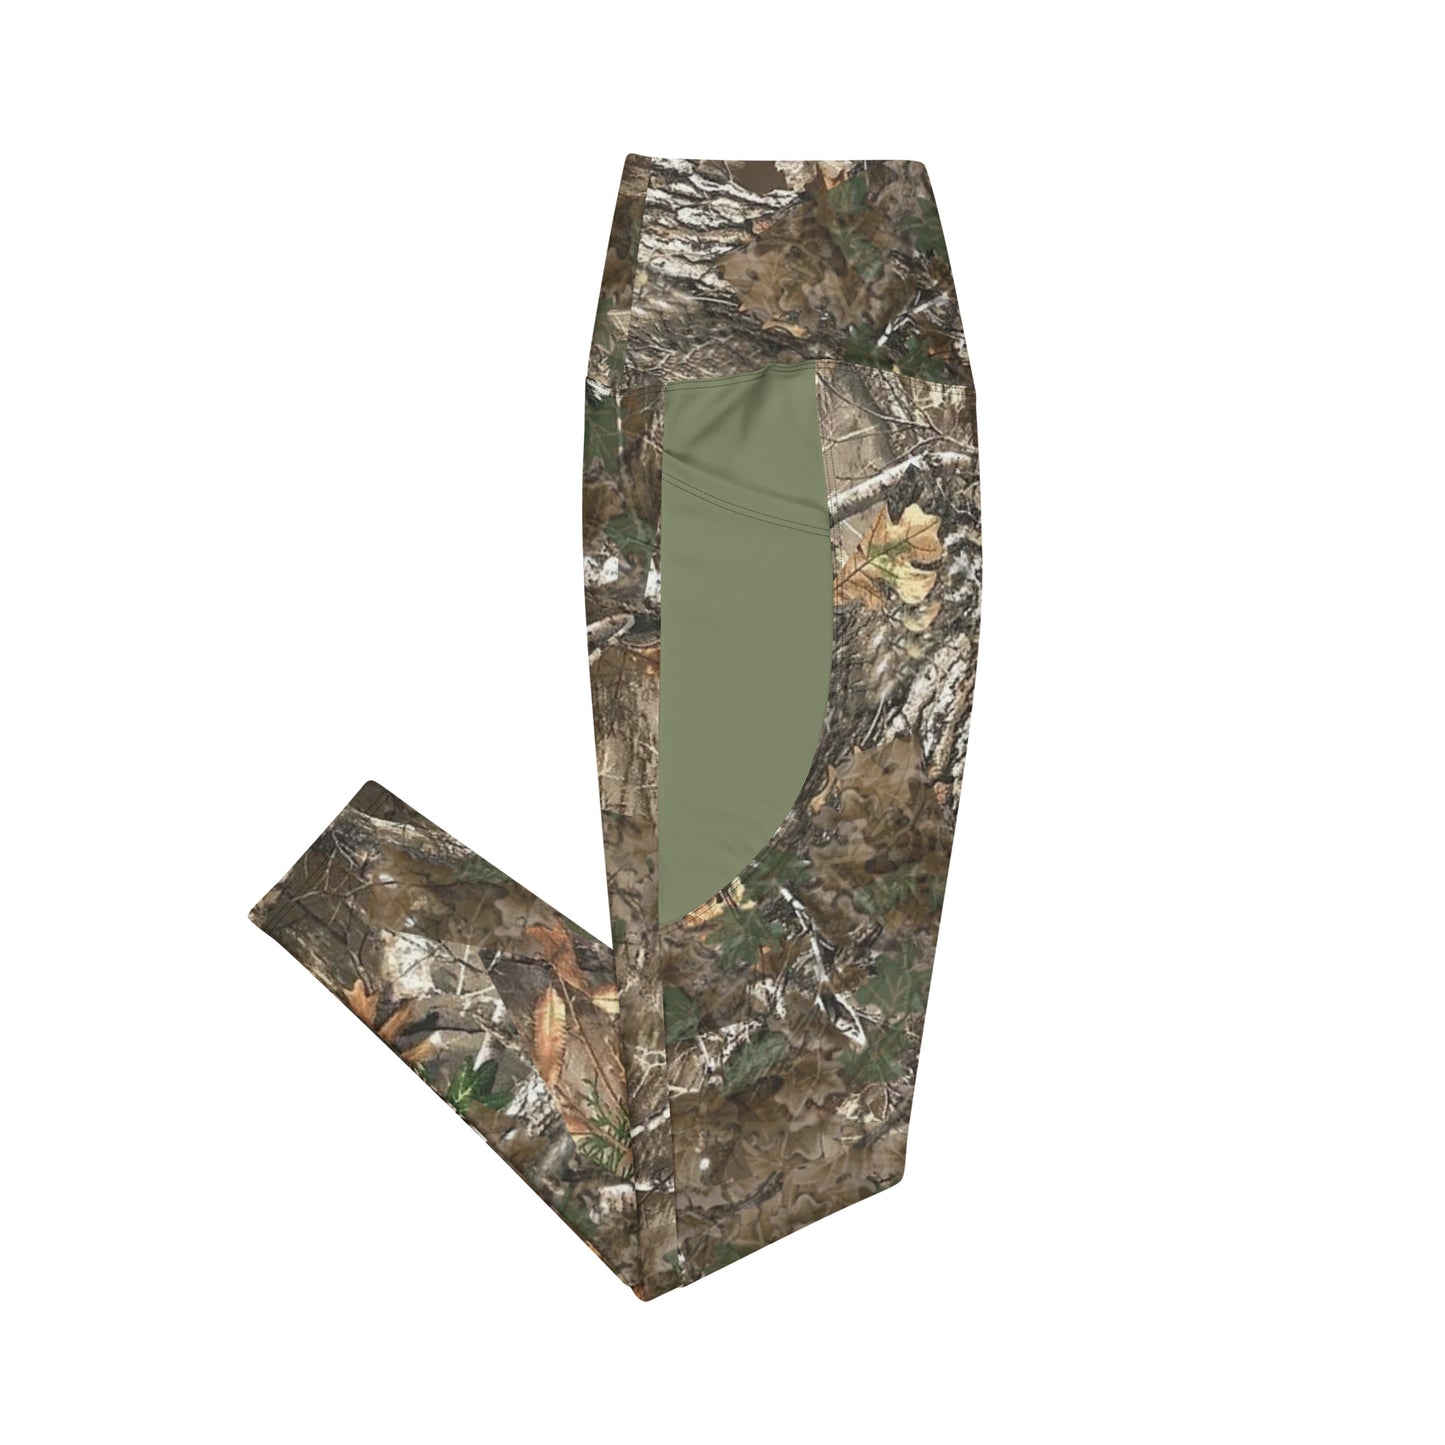 Wildfire Cigars Camouflage and military green activewear leggings facing the right